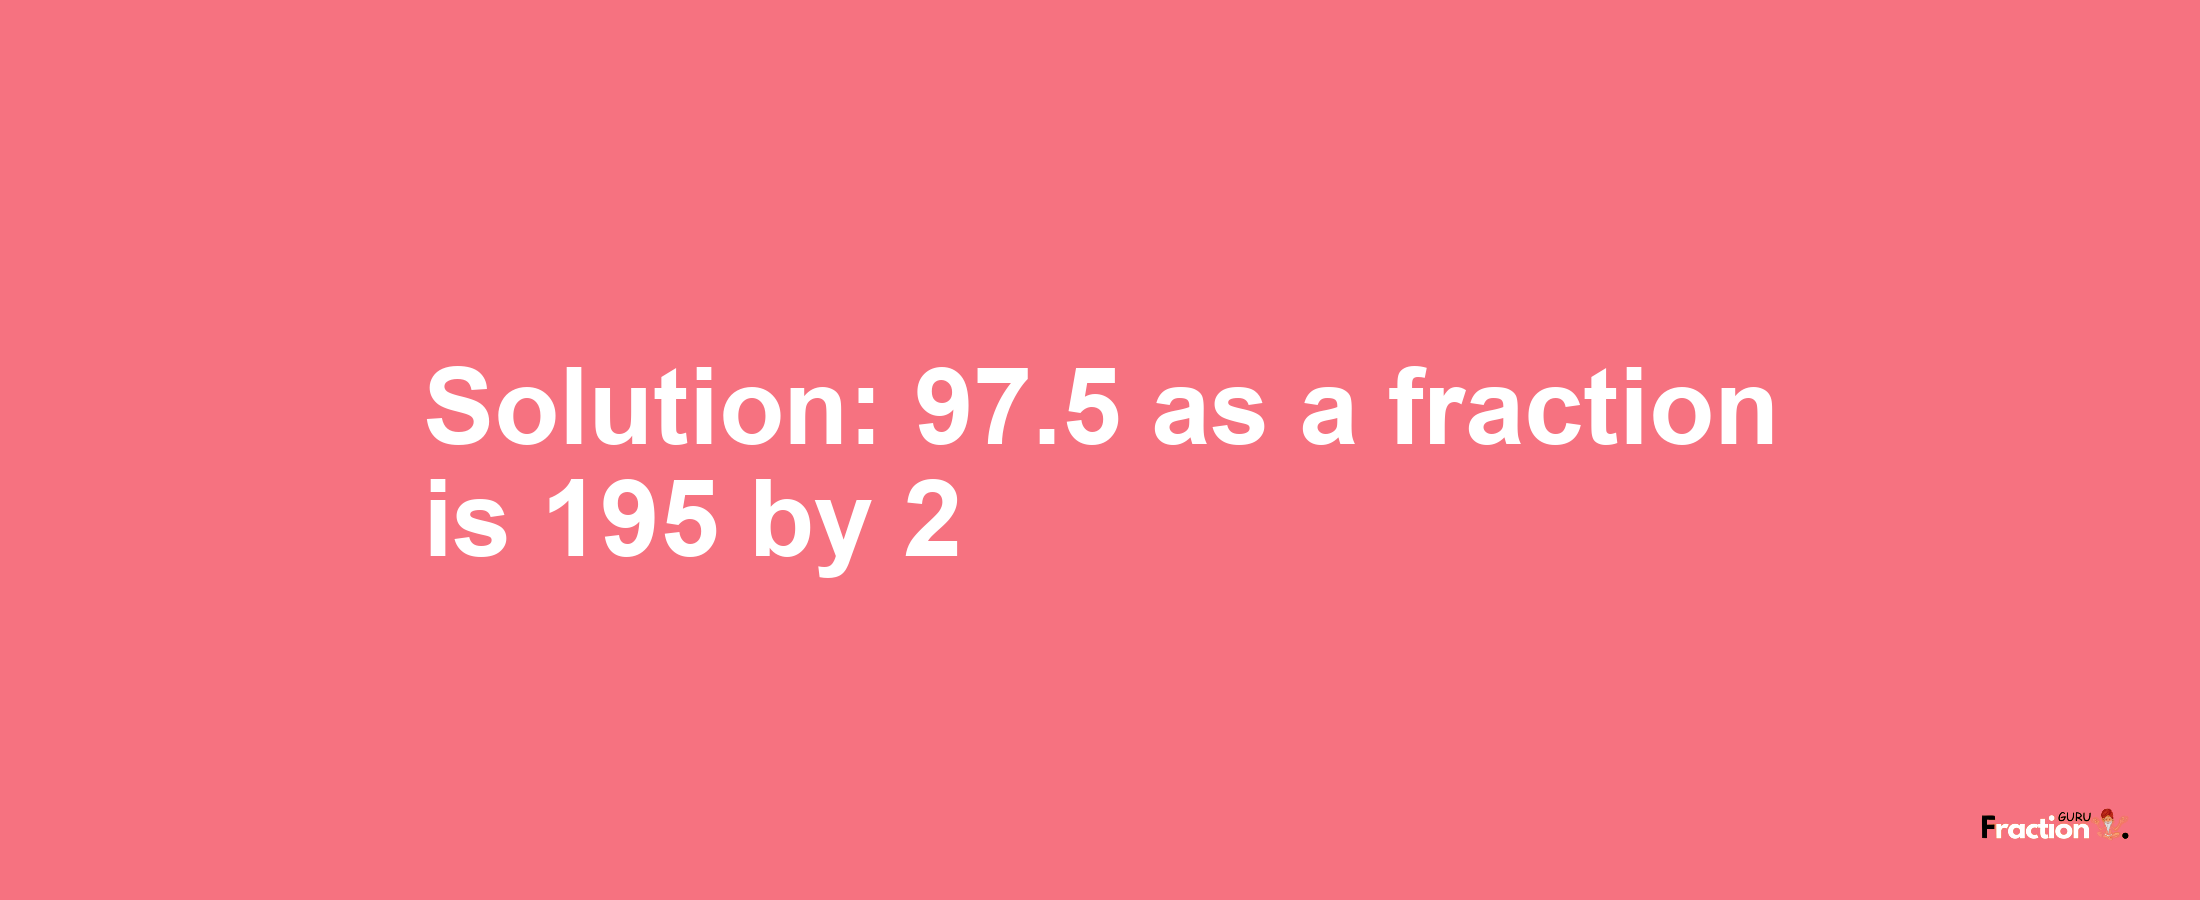 Solution:97.5 as a fraction is 195/2